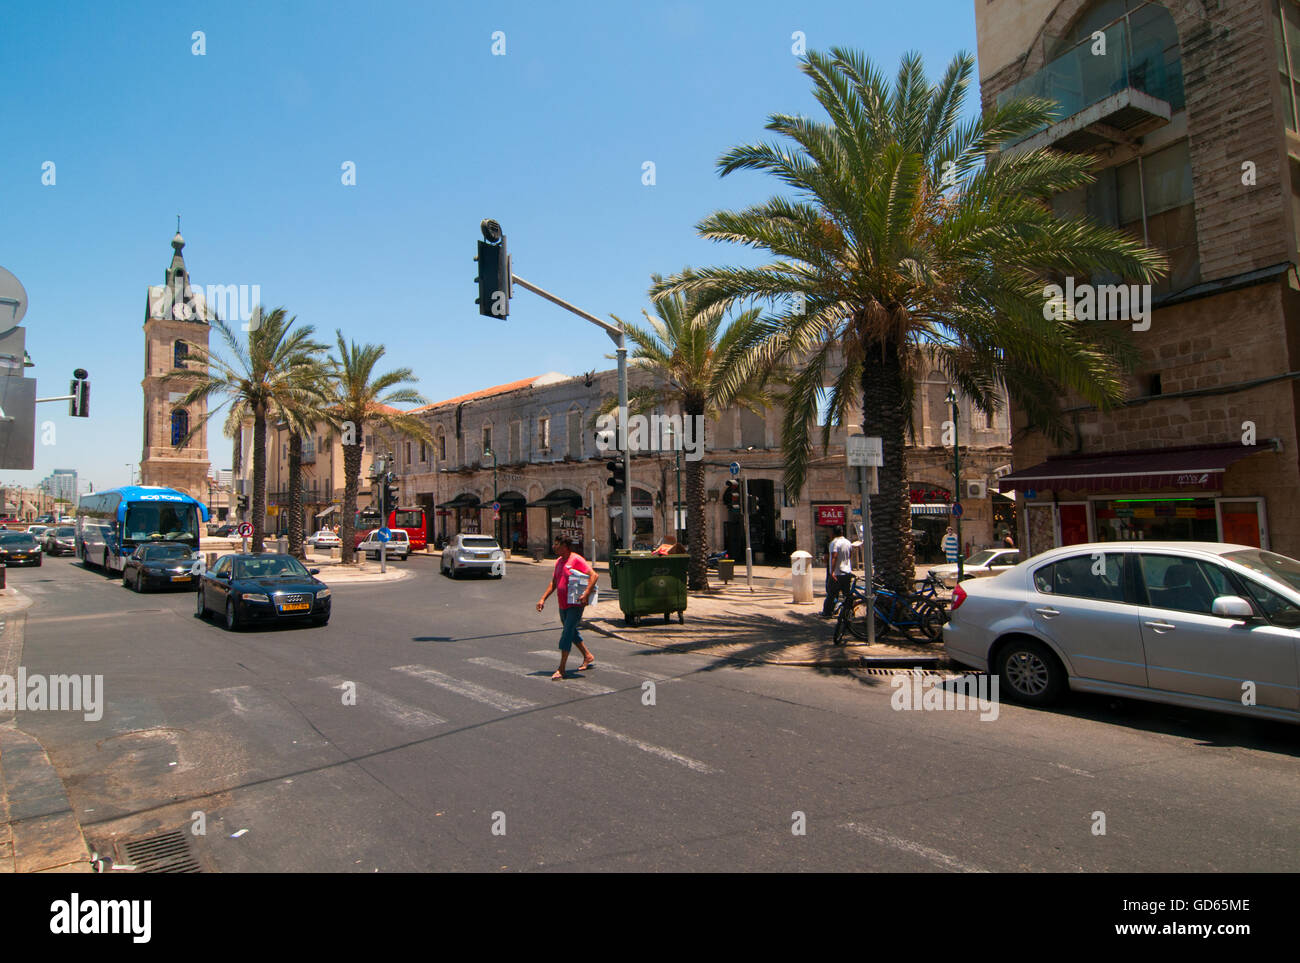 Israel, Jaffa, The Old clock tower in Jaffa, Clock Square, as seen from Yefet Street. Built in 1906 in honor of Sultan Abed al-H Stock Photo